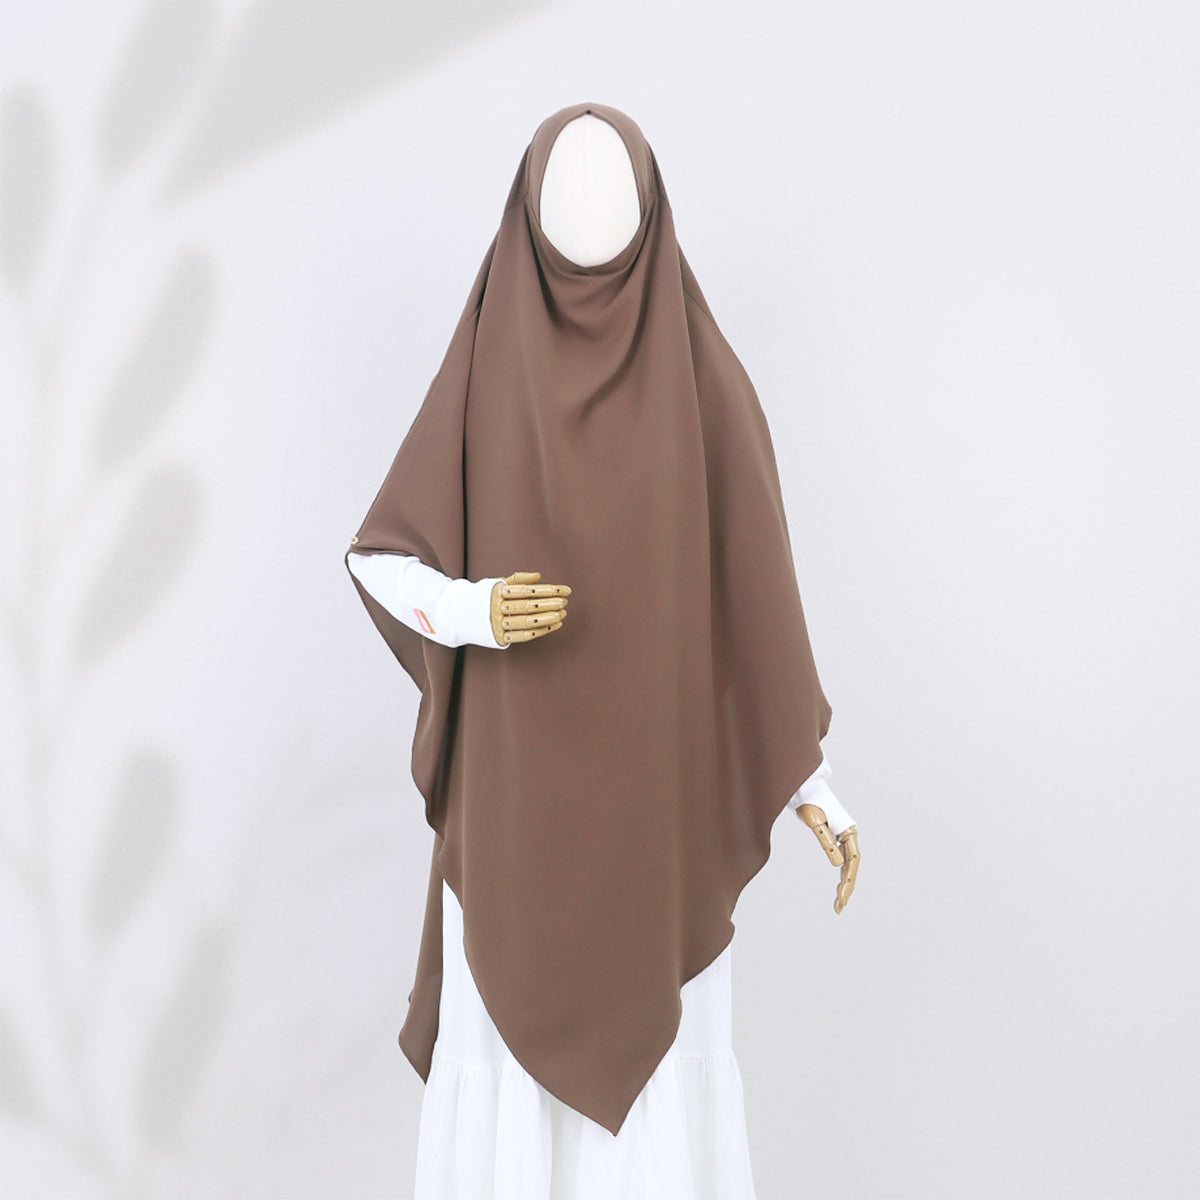 Chasmi French Khimar - Cocoa Brown